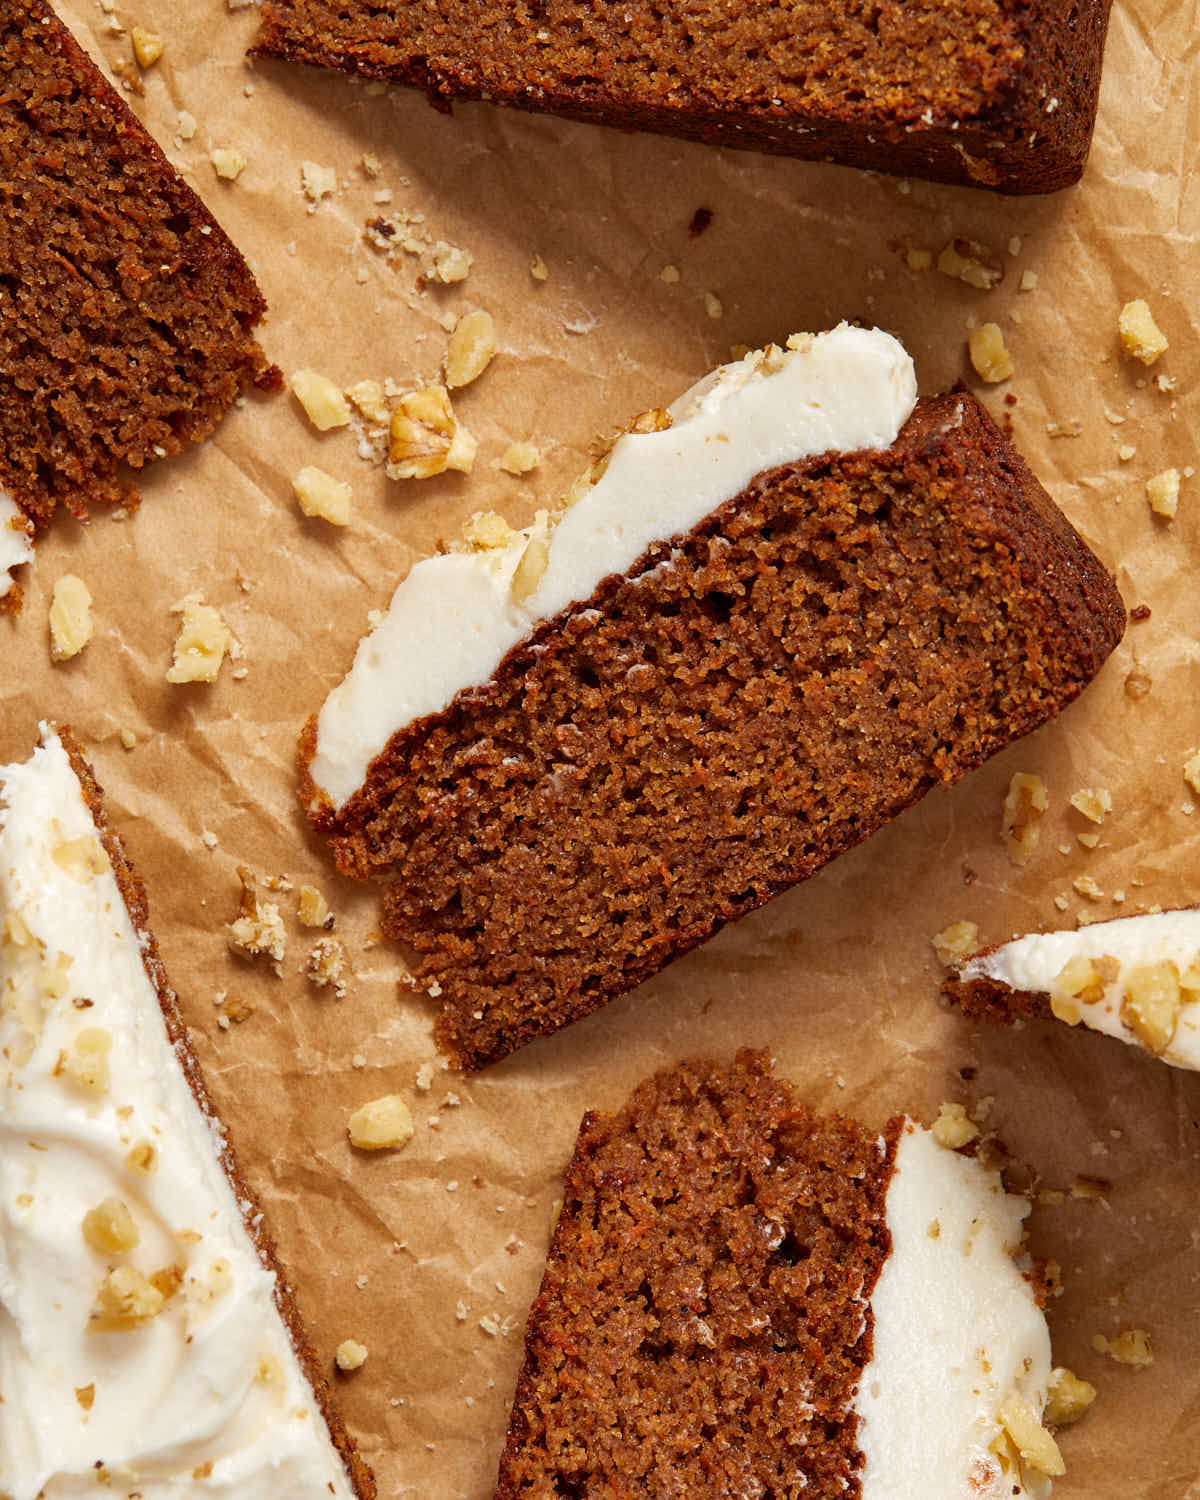 Overhead close up view of a slice of carrot cake on brown parchment paper.